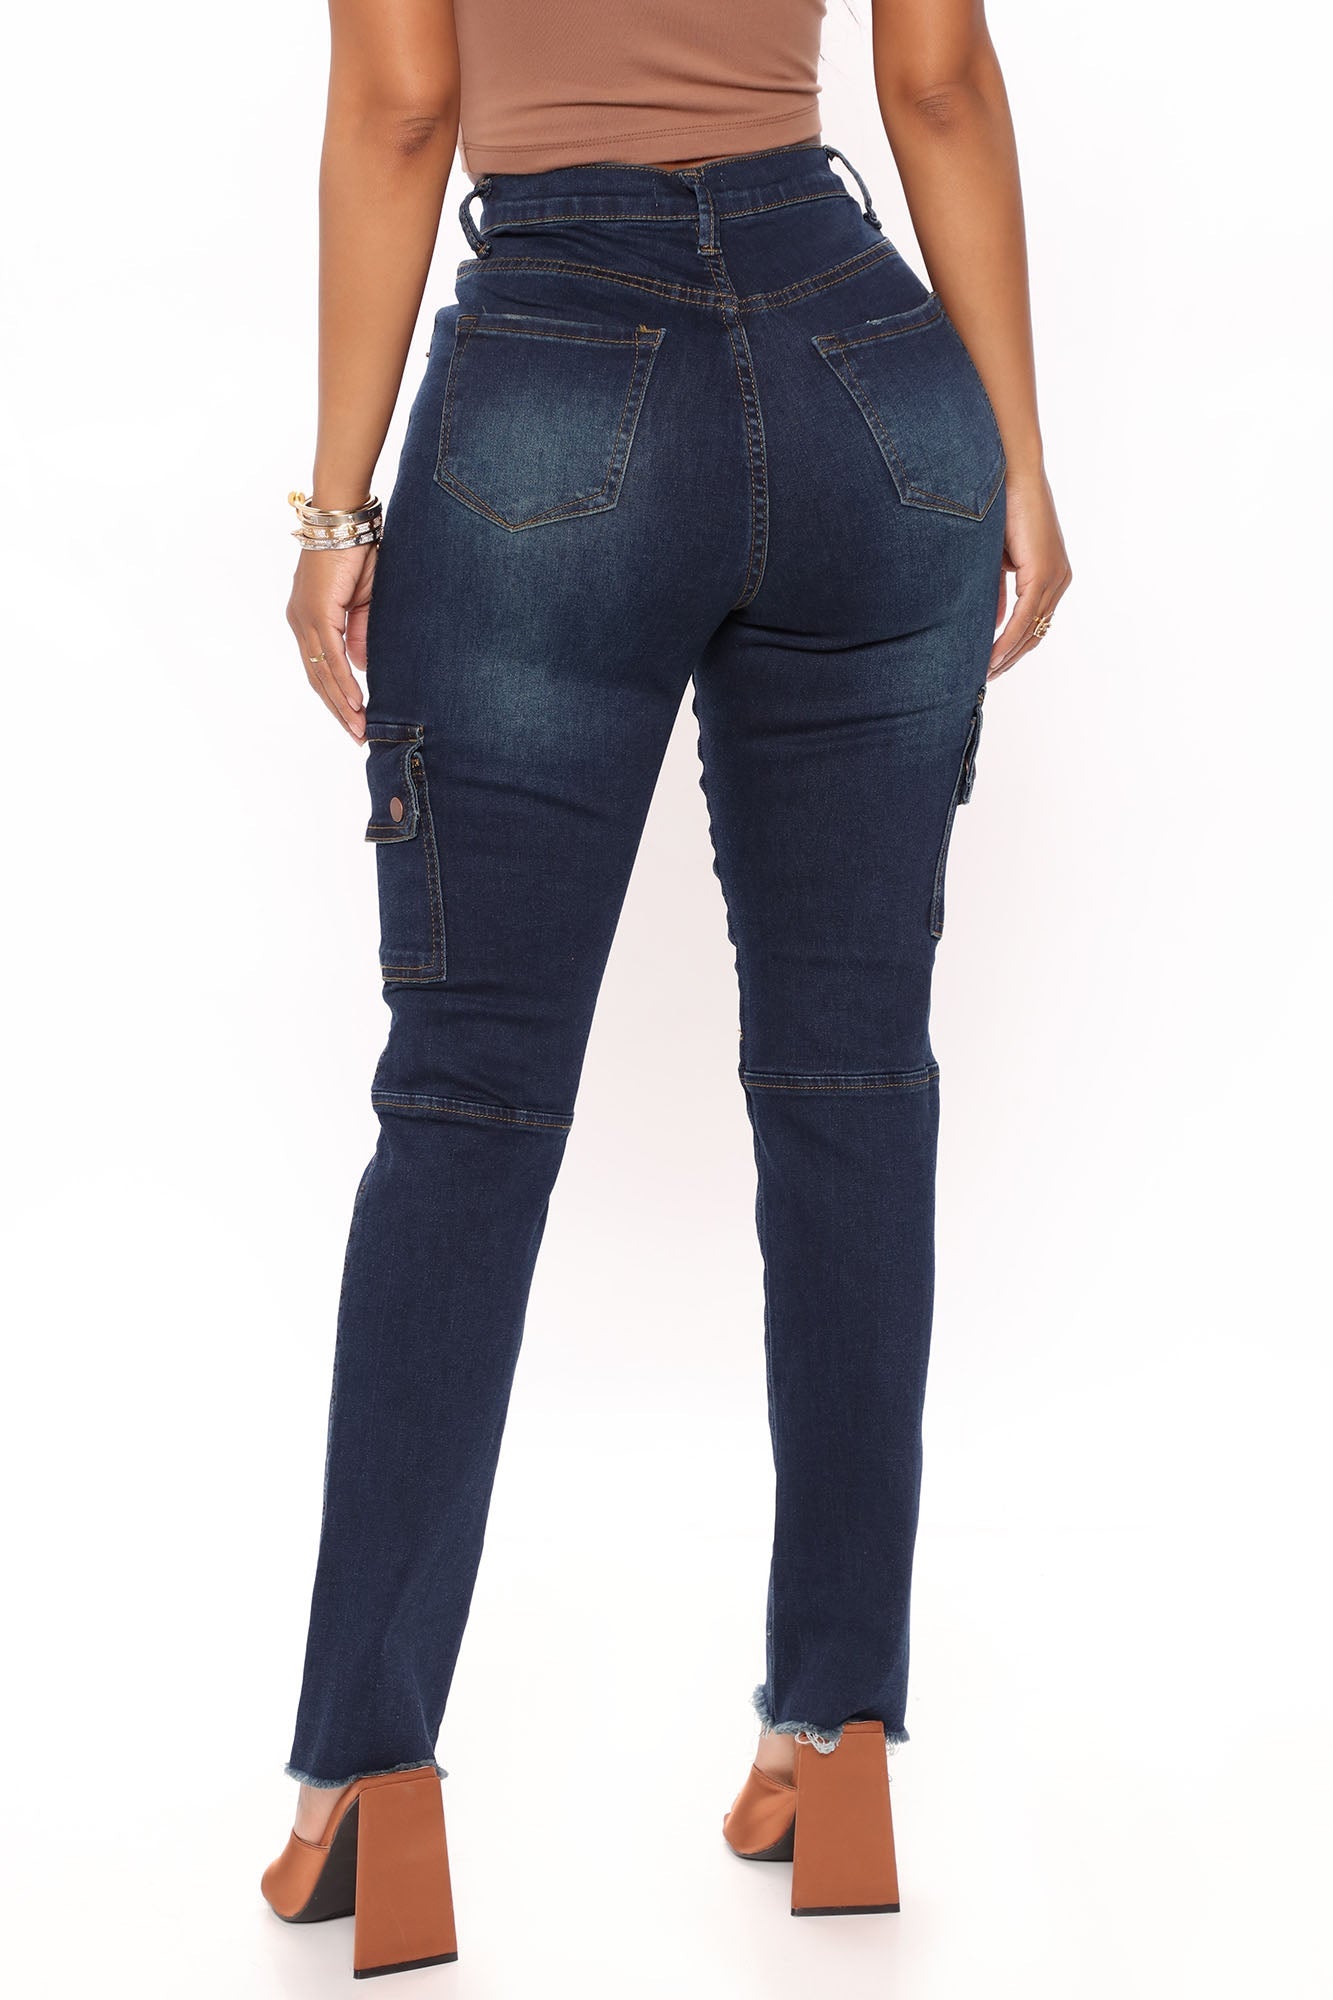 You Oughta Know Cargo Jeans - Dark Wash